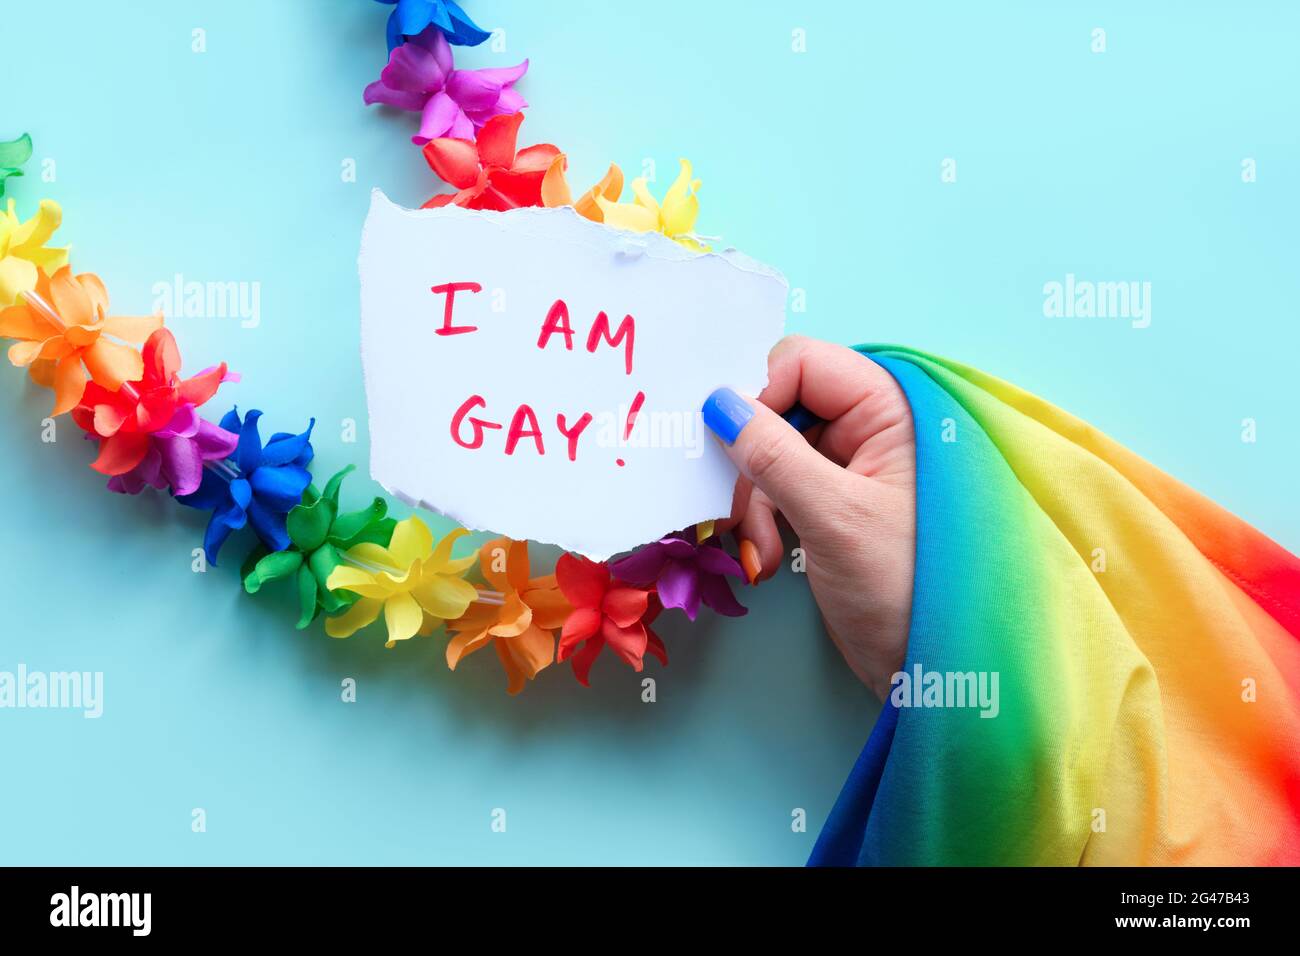 LGBTQ community pride. Text I am Gay on paper in hand with rainbow flag,  flower garland and fake nails in colors of rainbow. Concept shot. Flat lay  Stock Photo - Alamy